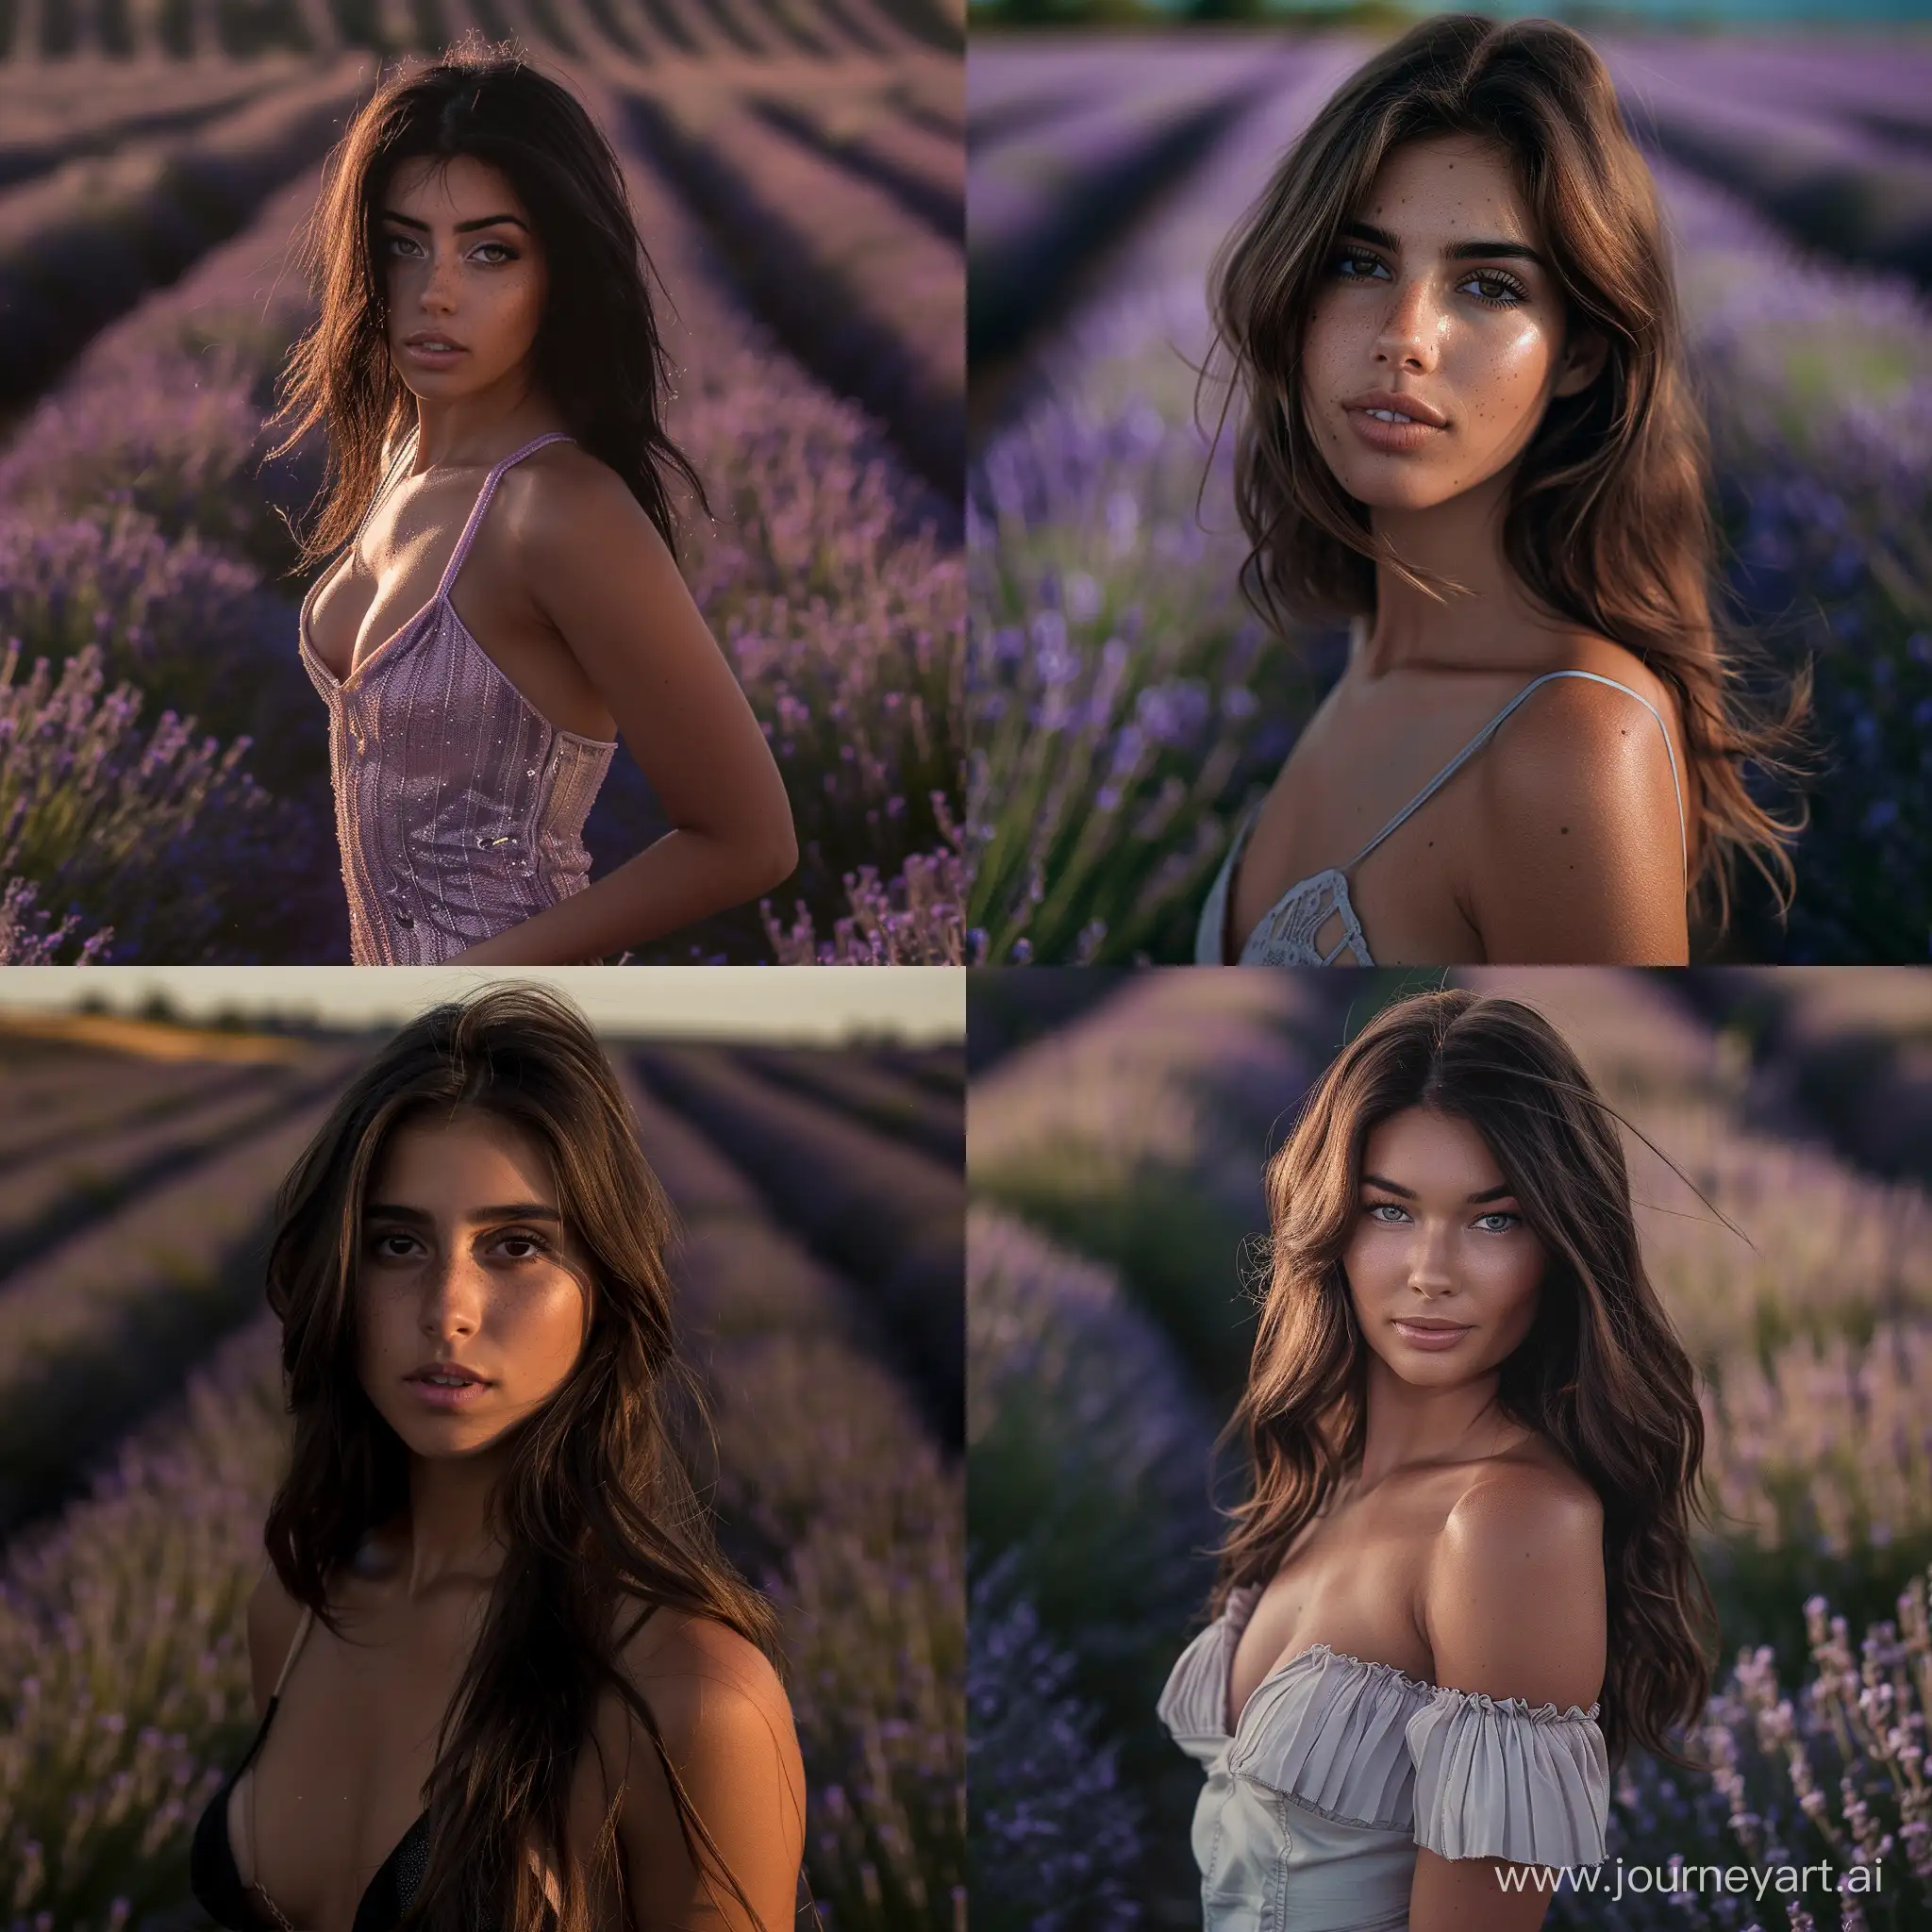 Brunette-Model-with-Hourglass-Physique-in-Lavender-Field